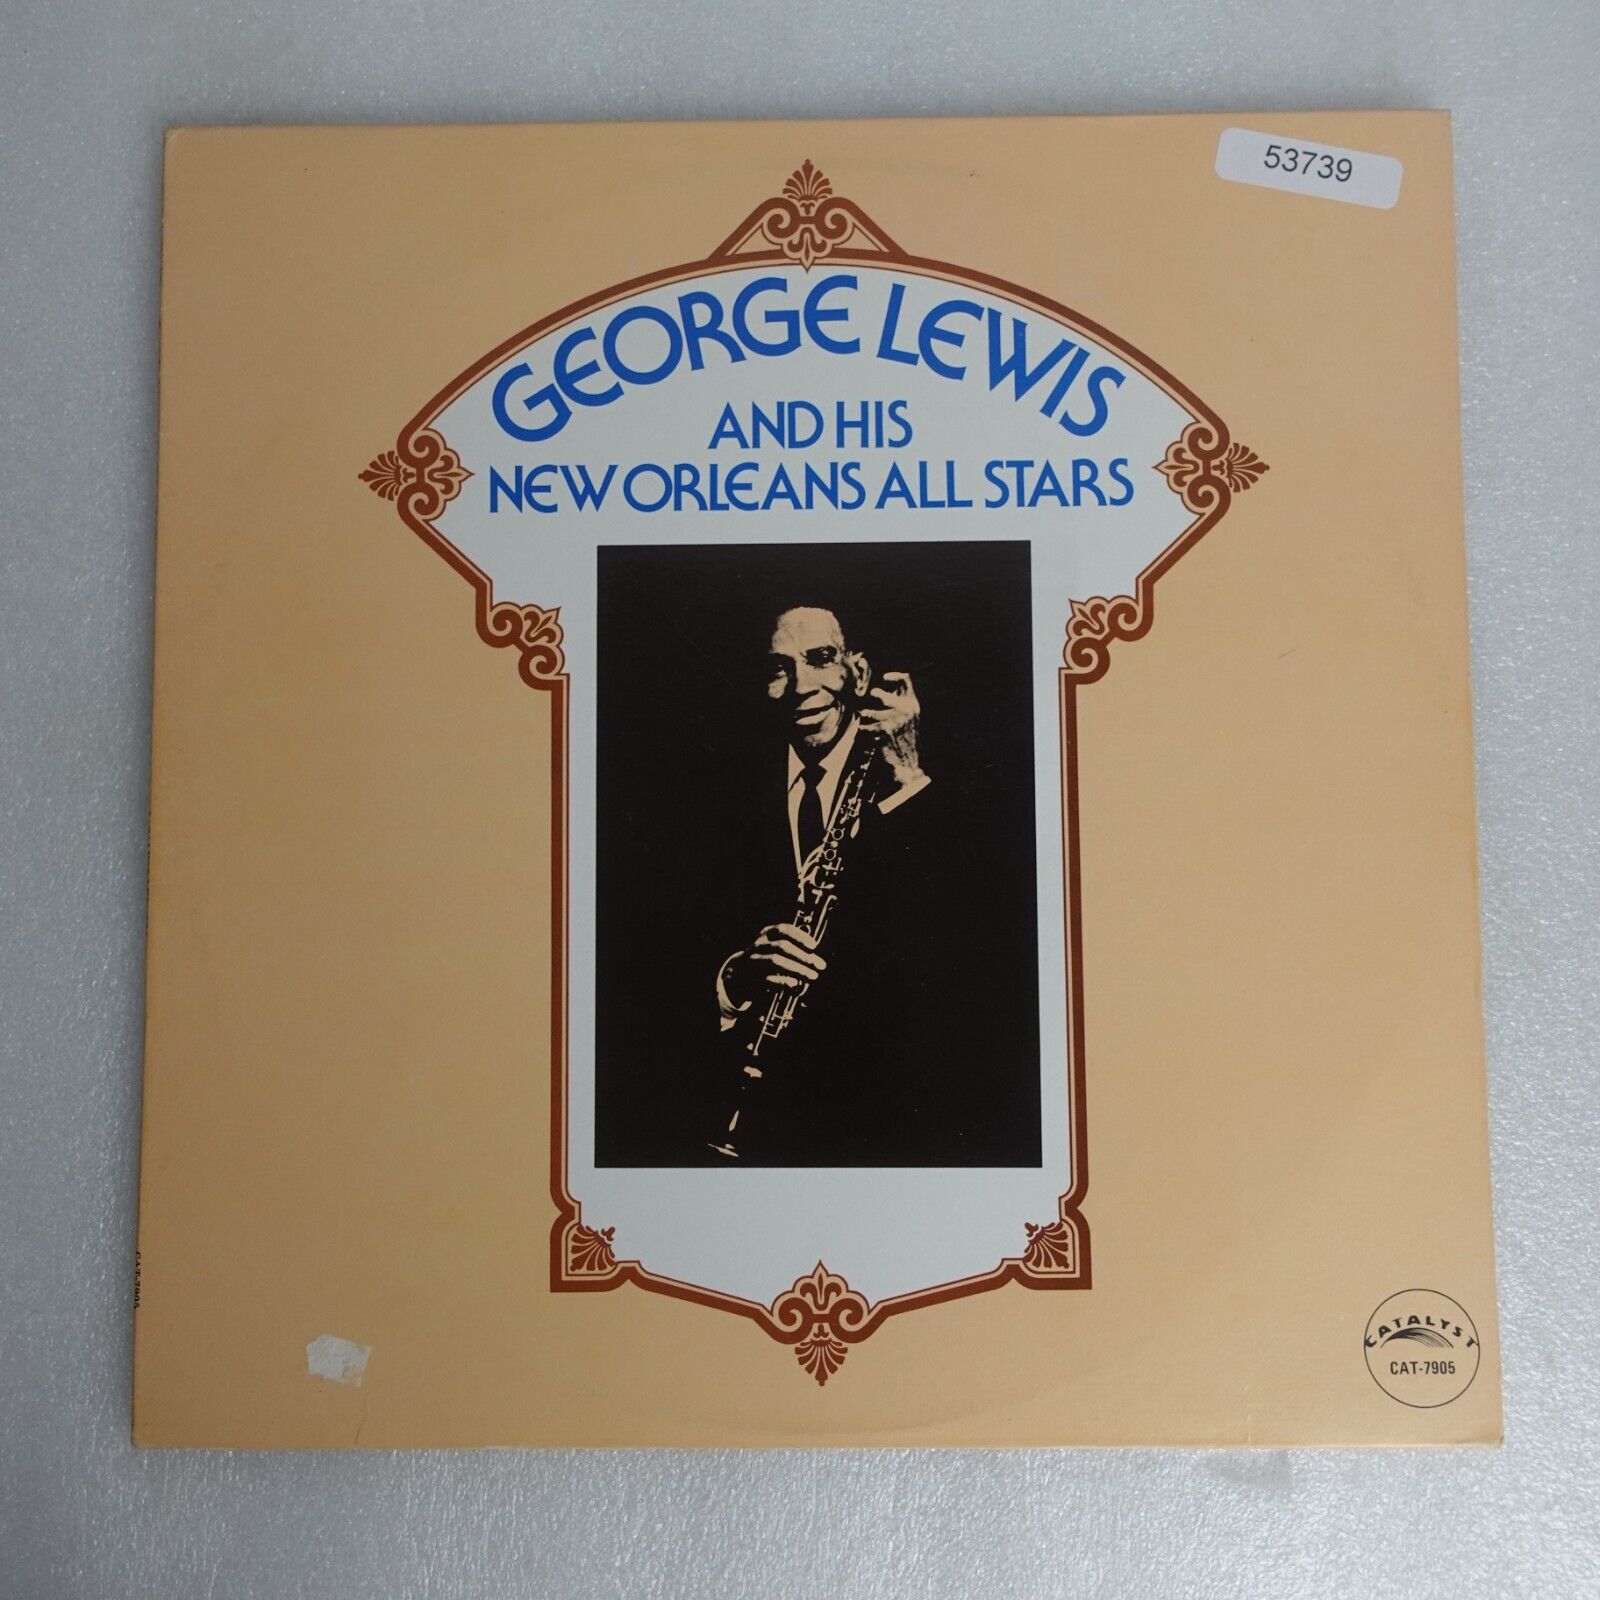 George Lewis And New Orleans All Stars Self Titled LP Vinyl Record Album